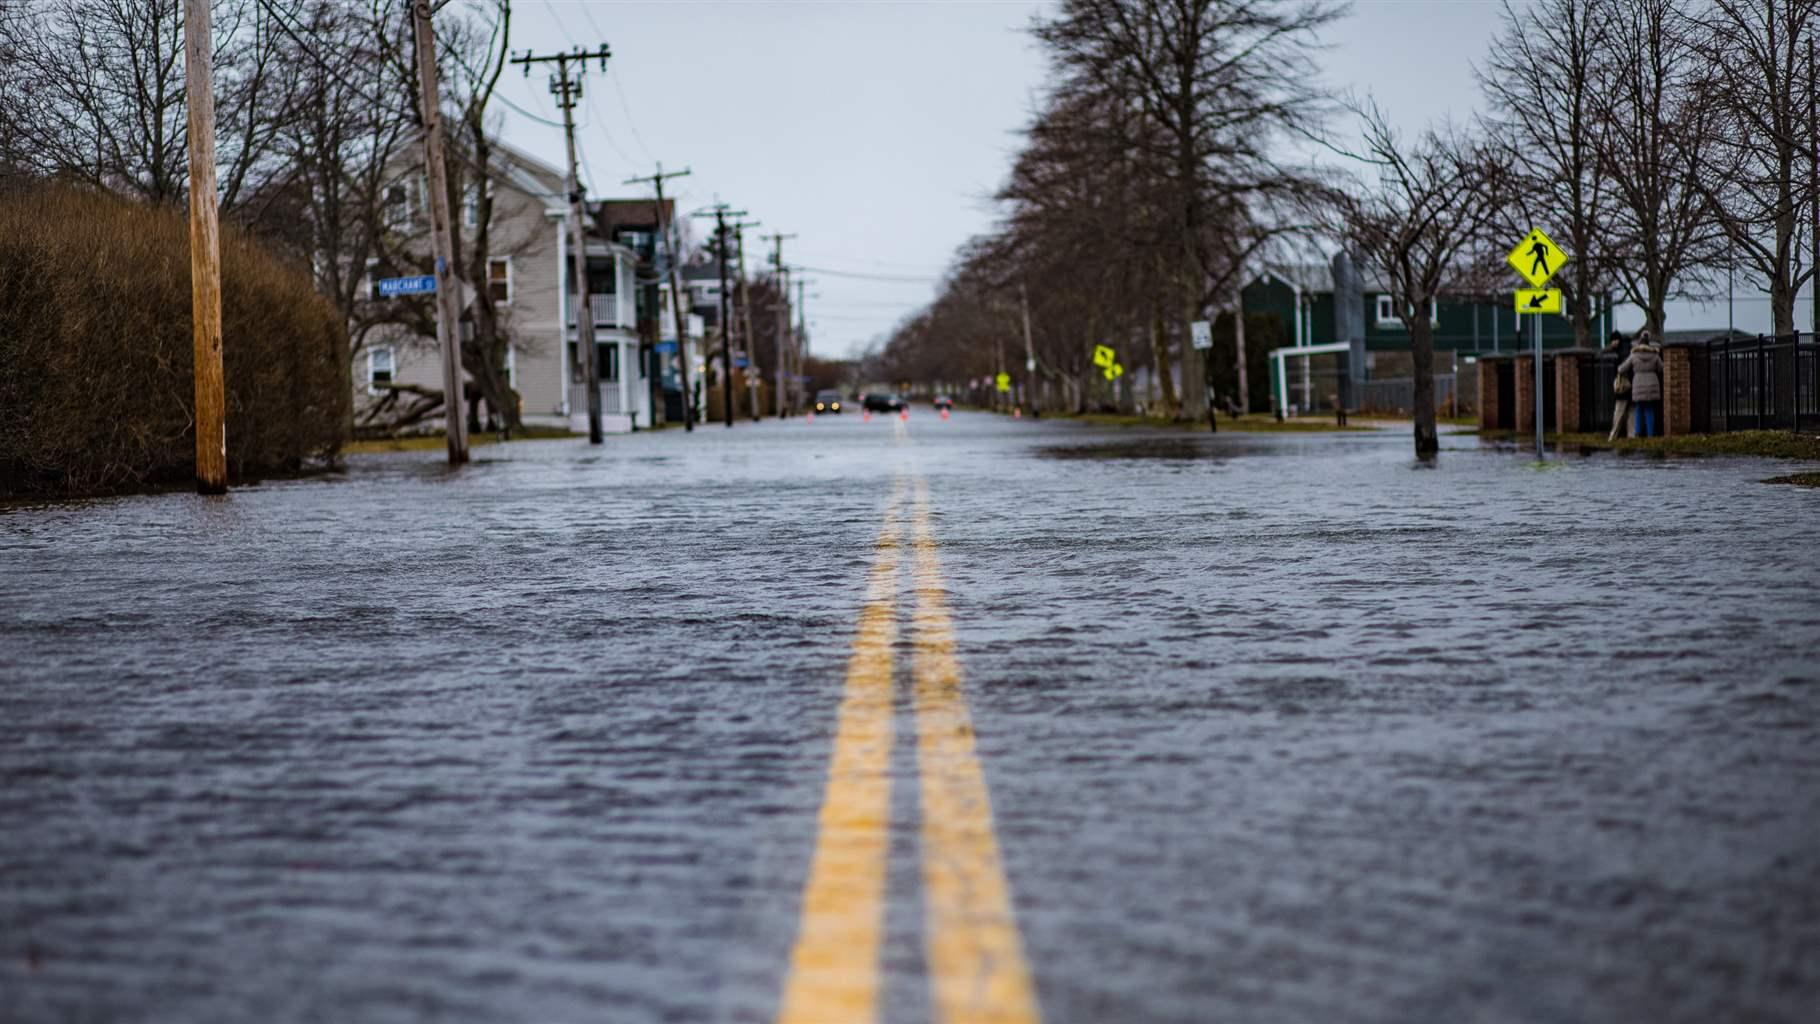 The streets of Newport Rhode Island after a Nor'Easter hit the area with heavy winds and storm surges from the Atlantic Ocean. The roads were closed with flooding for days. Climate Change concept.